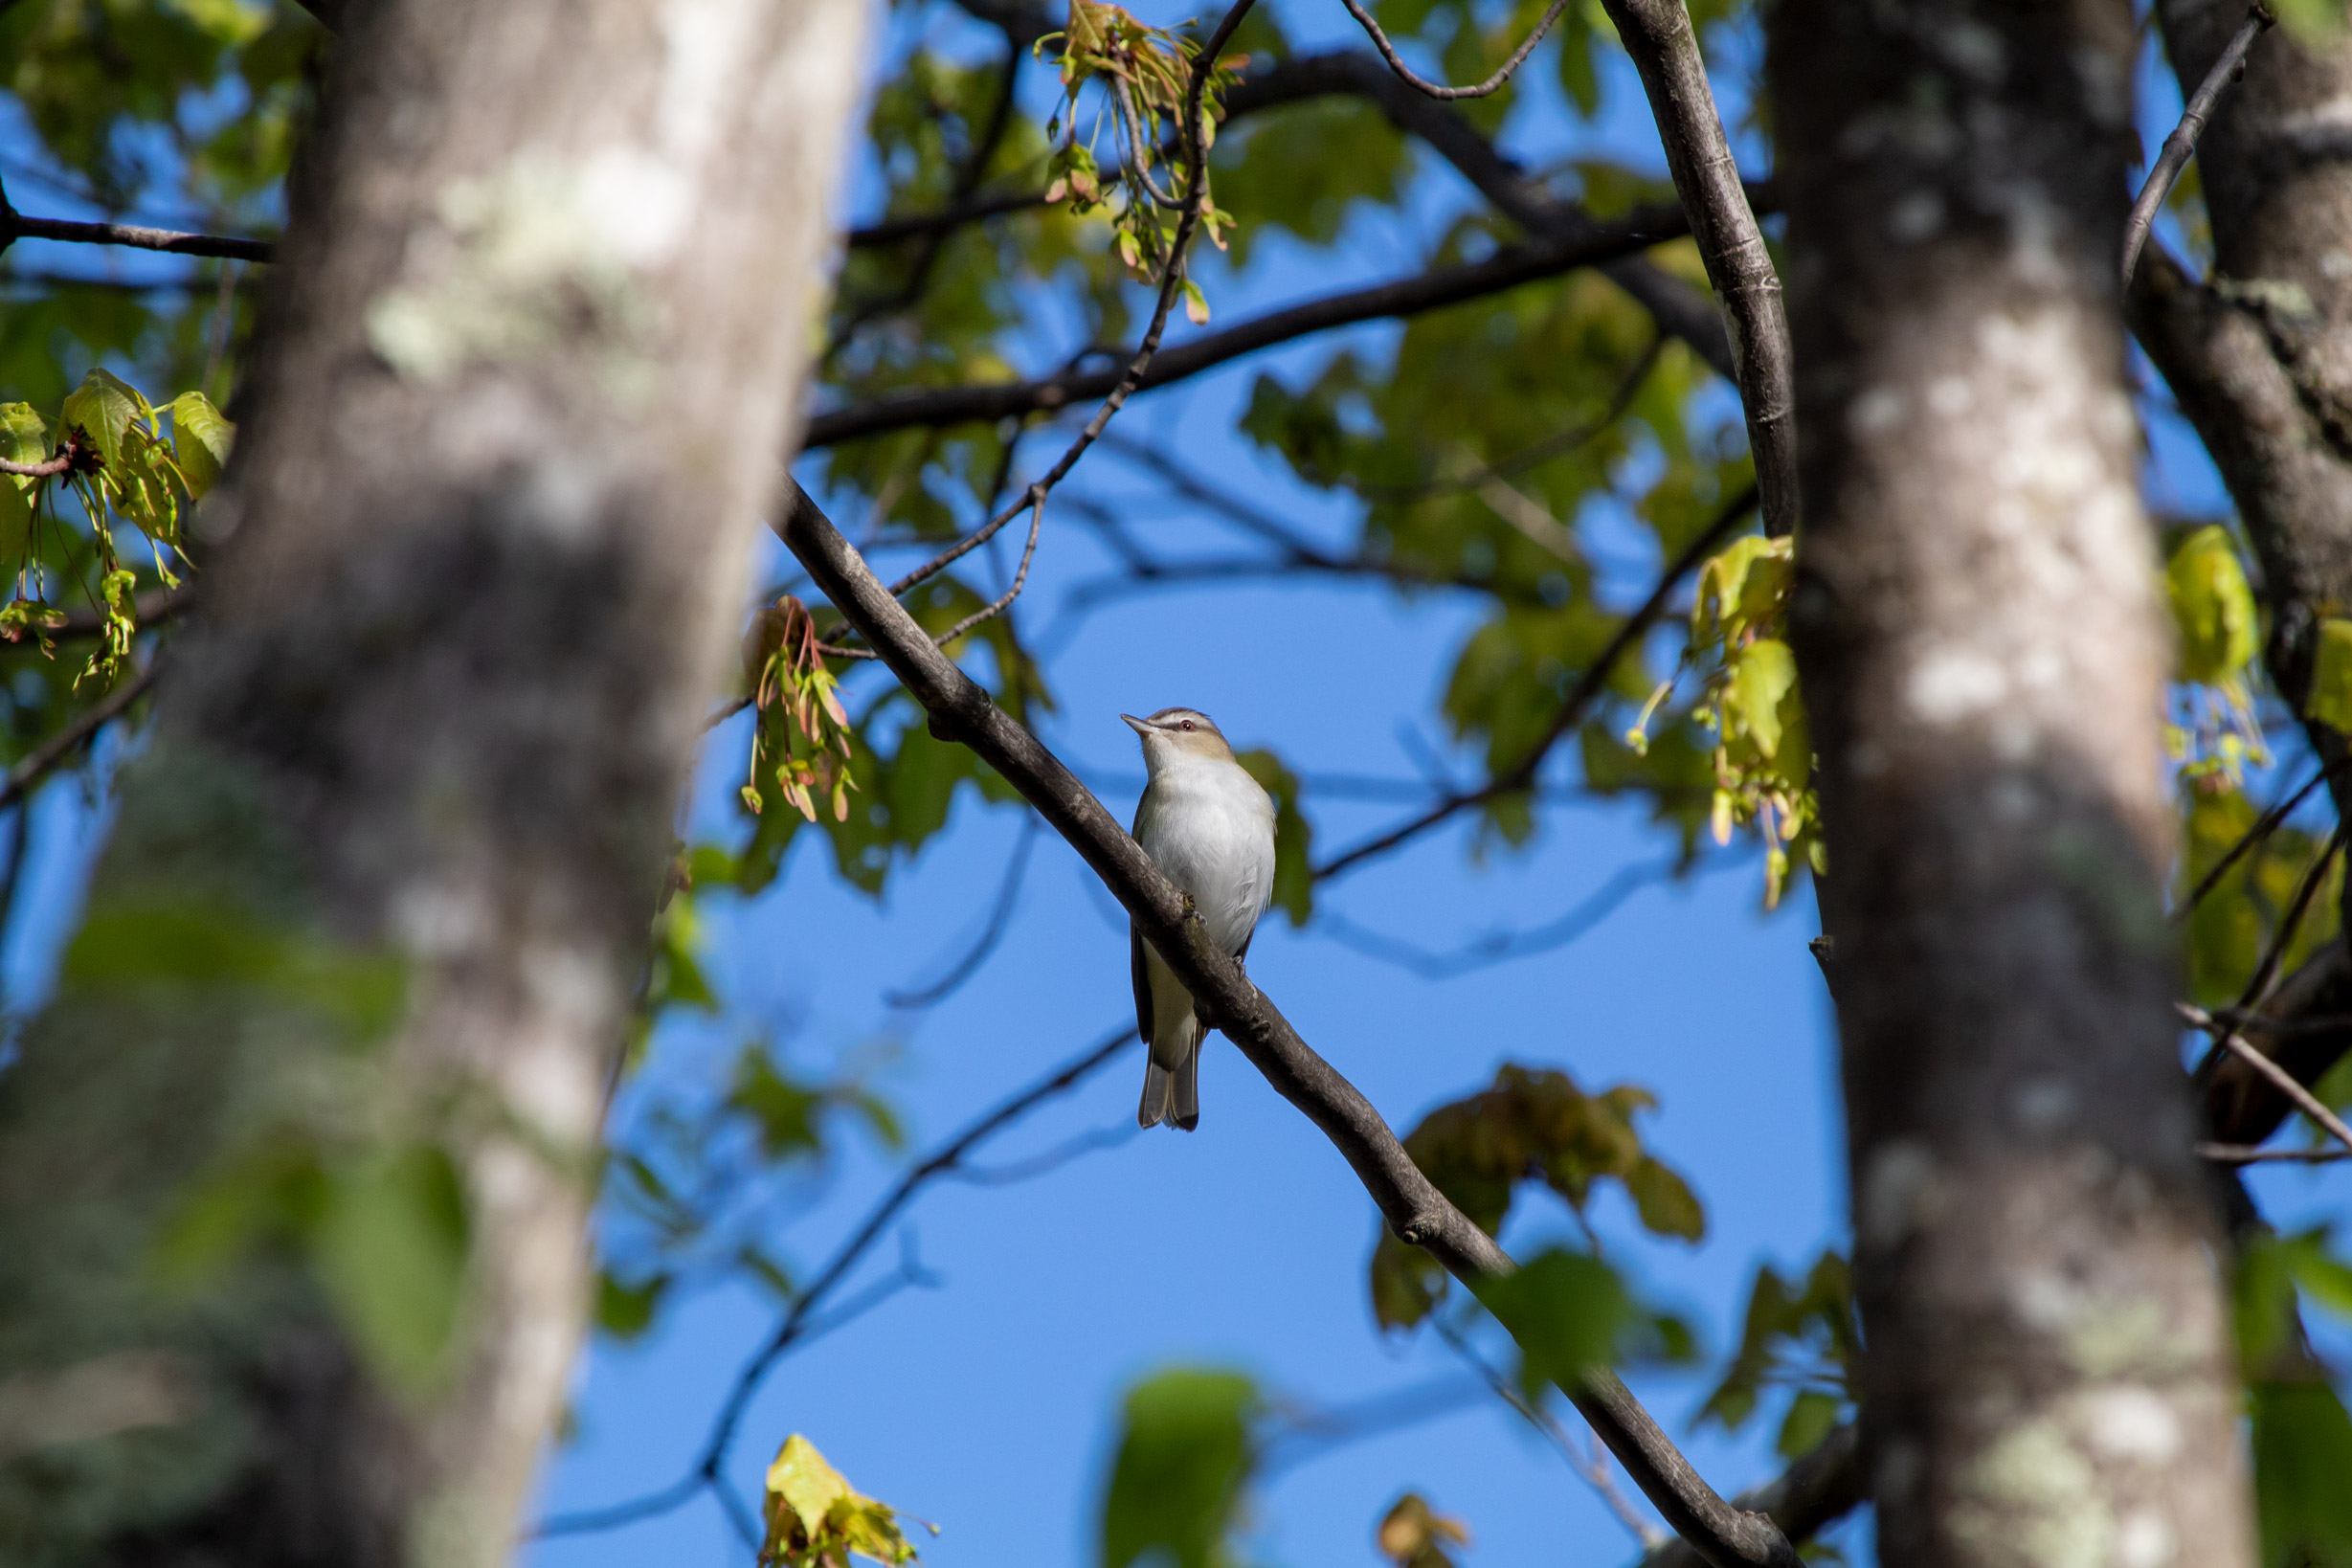 Small light-coloured bird in a tree canopy